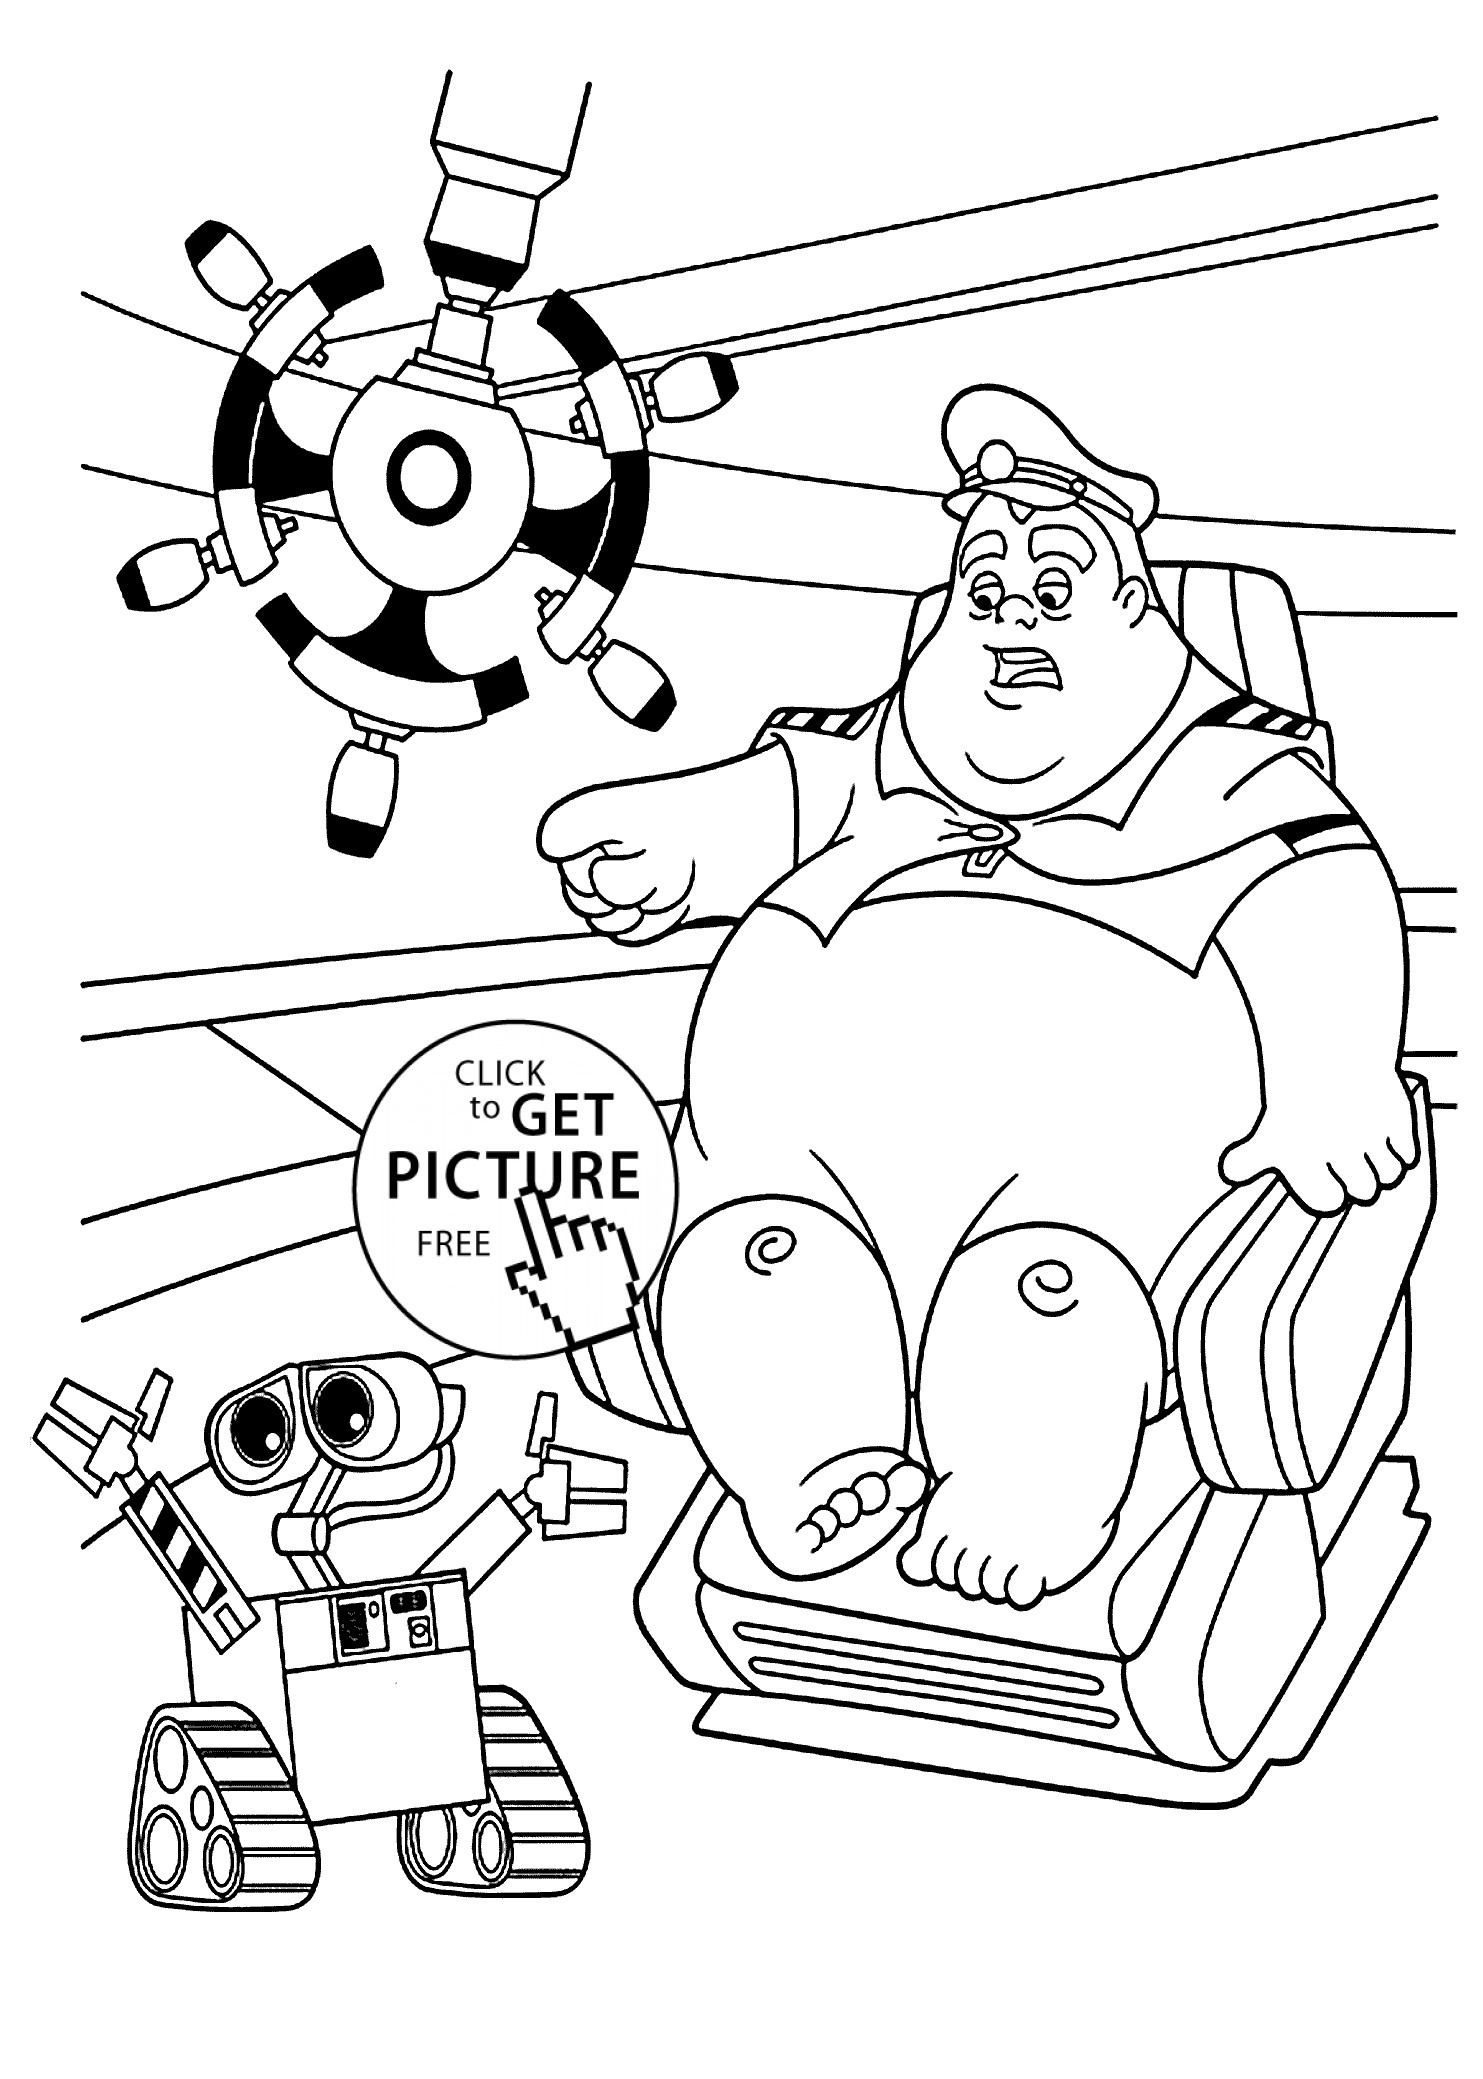 E Coloring Pages
 Wall E and captan coloring pages for kids printable free